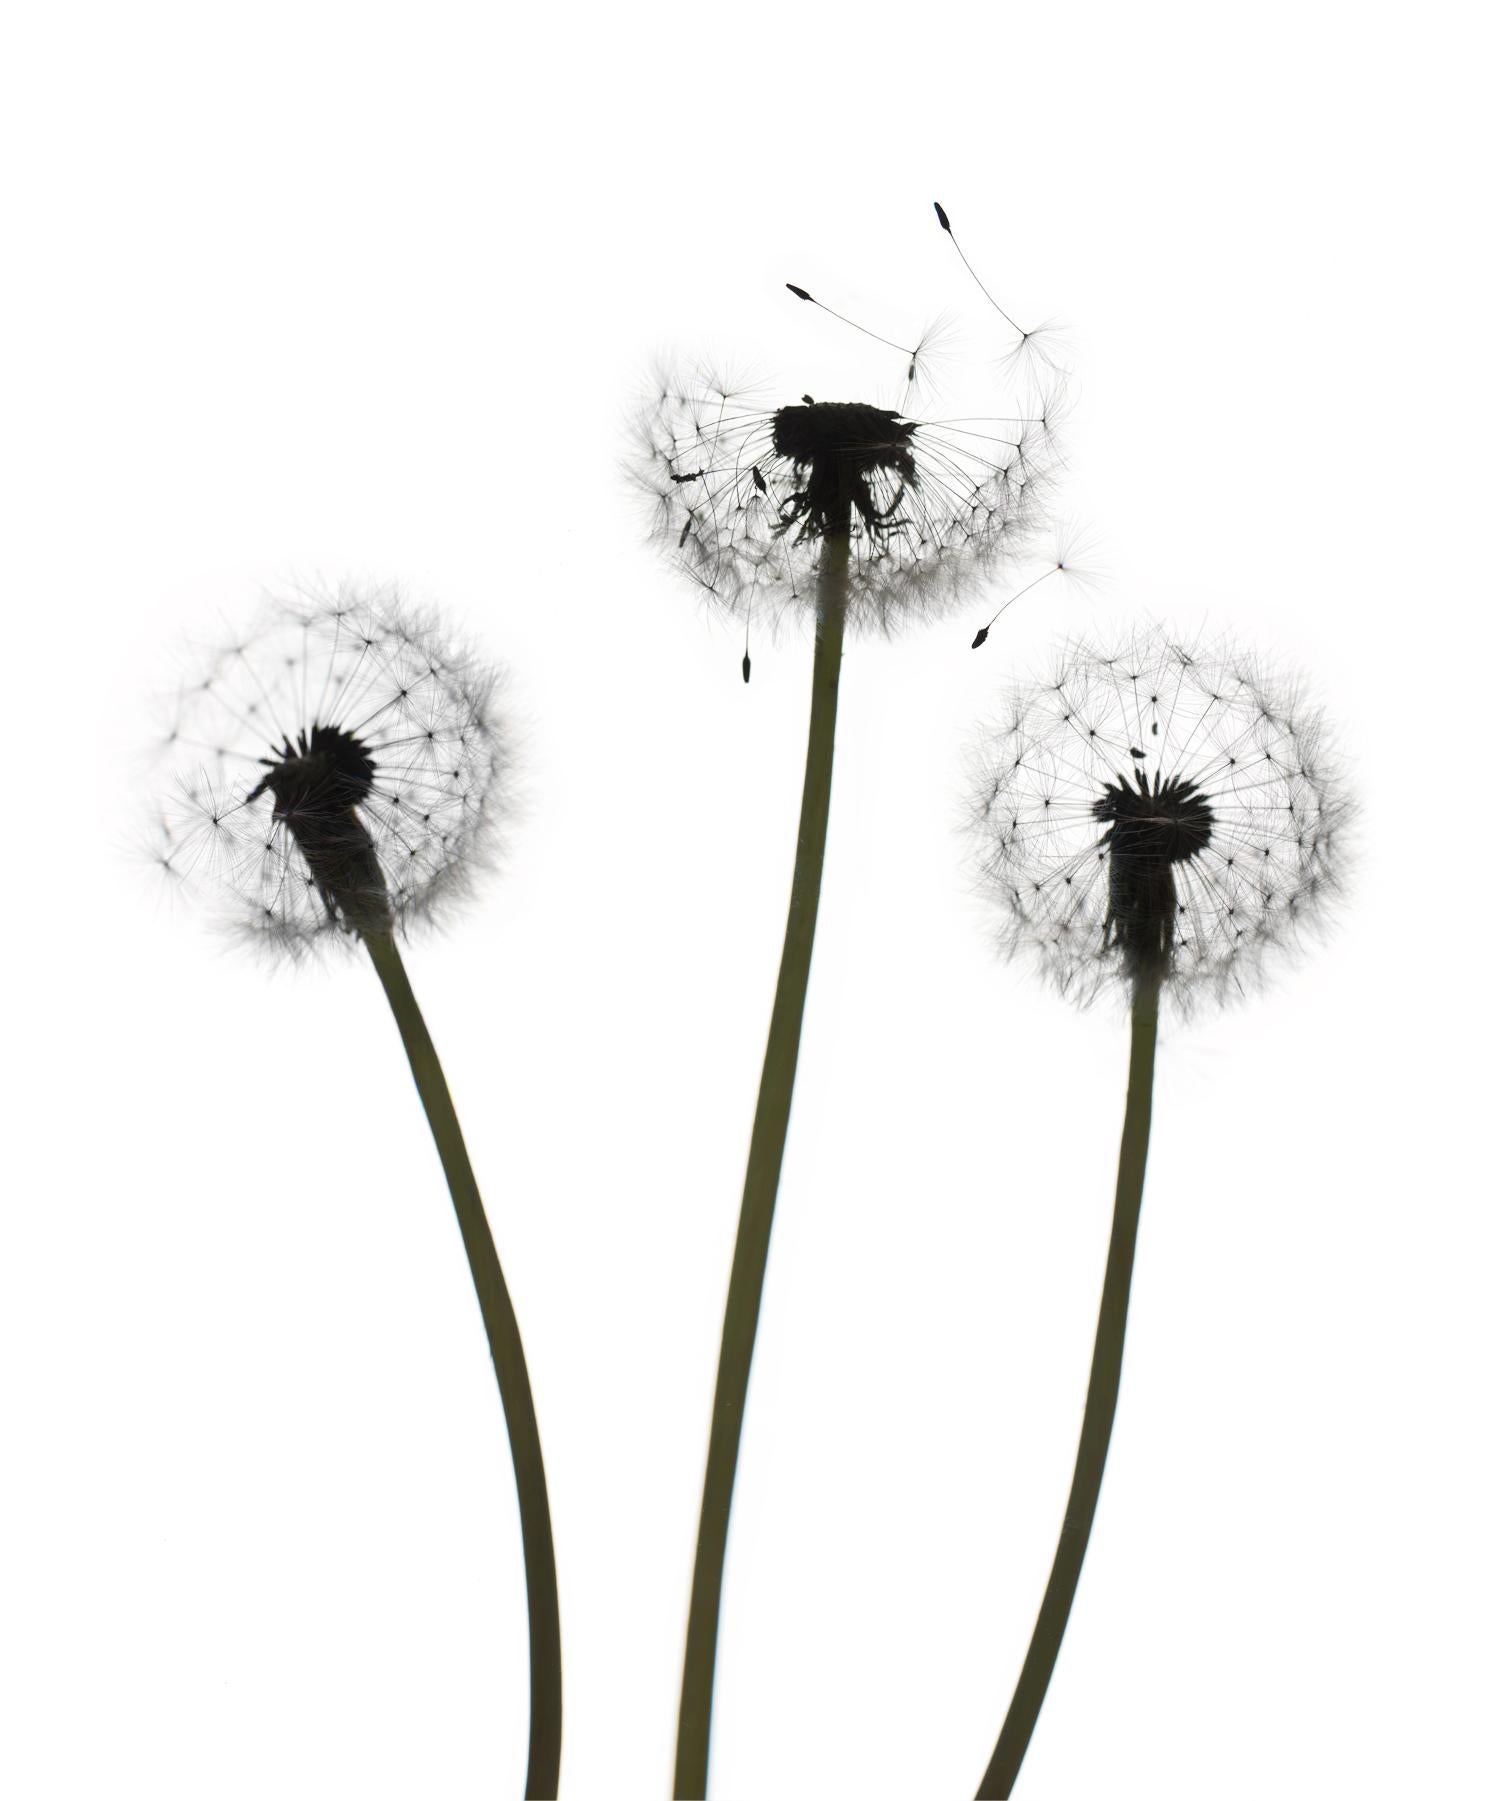 Chad Kleitsch Color Photograph - Untitled Flower 147 (White): Still Life Photograph of Dandelion Flowers on White